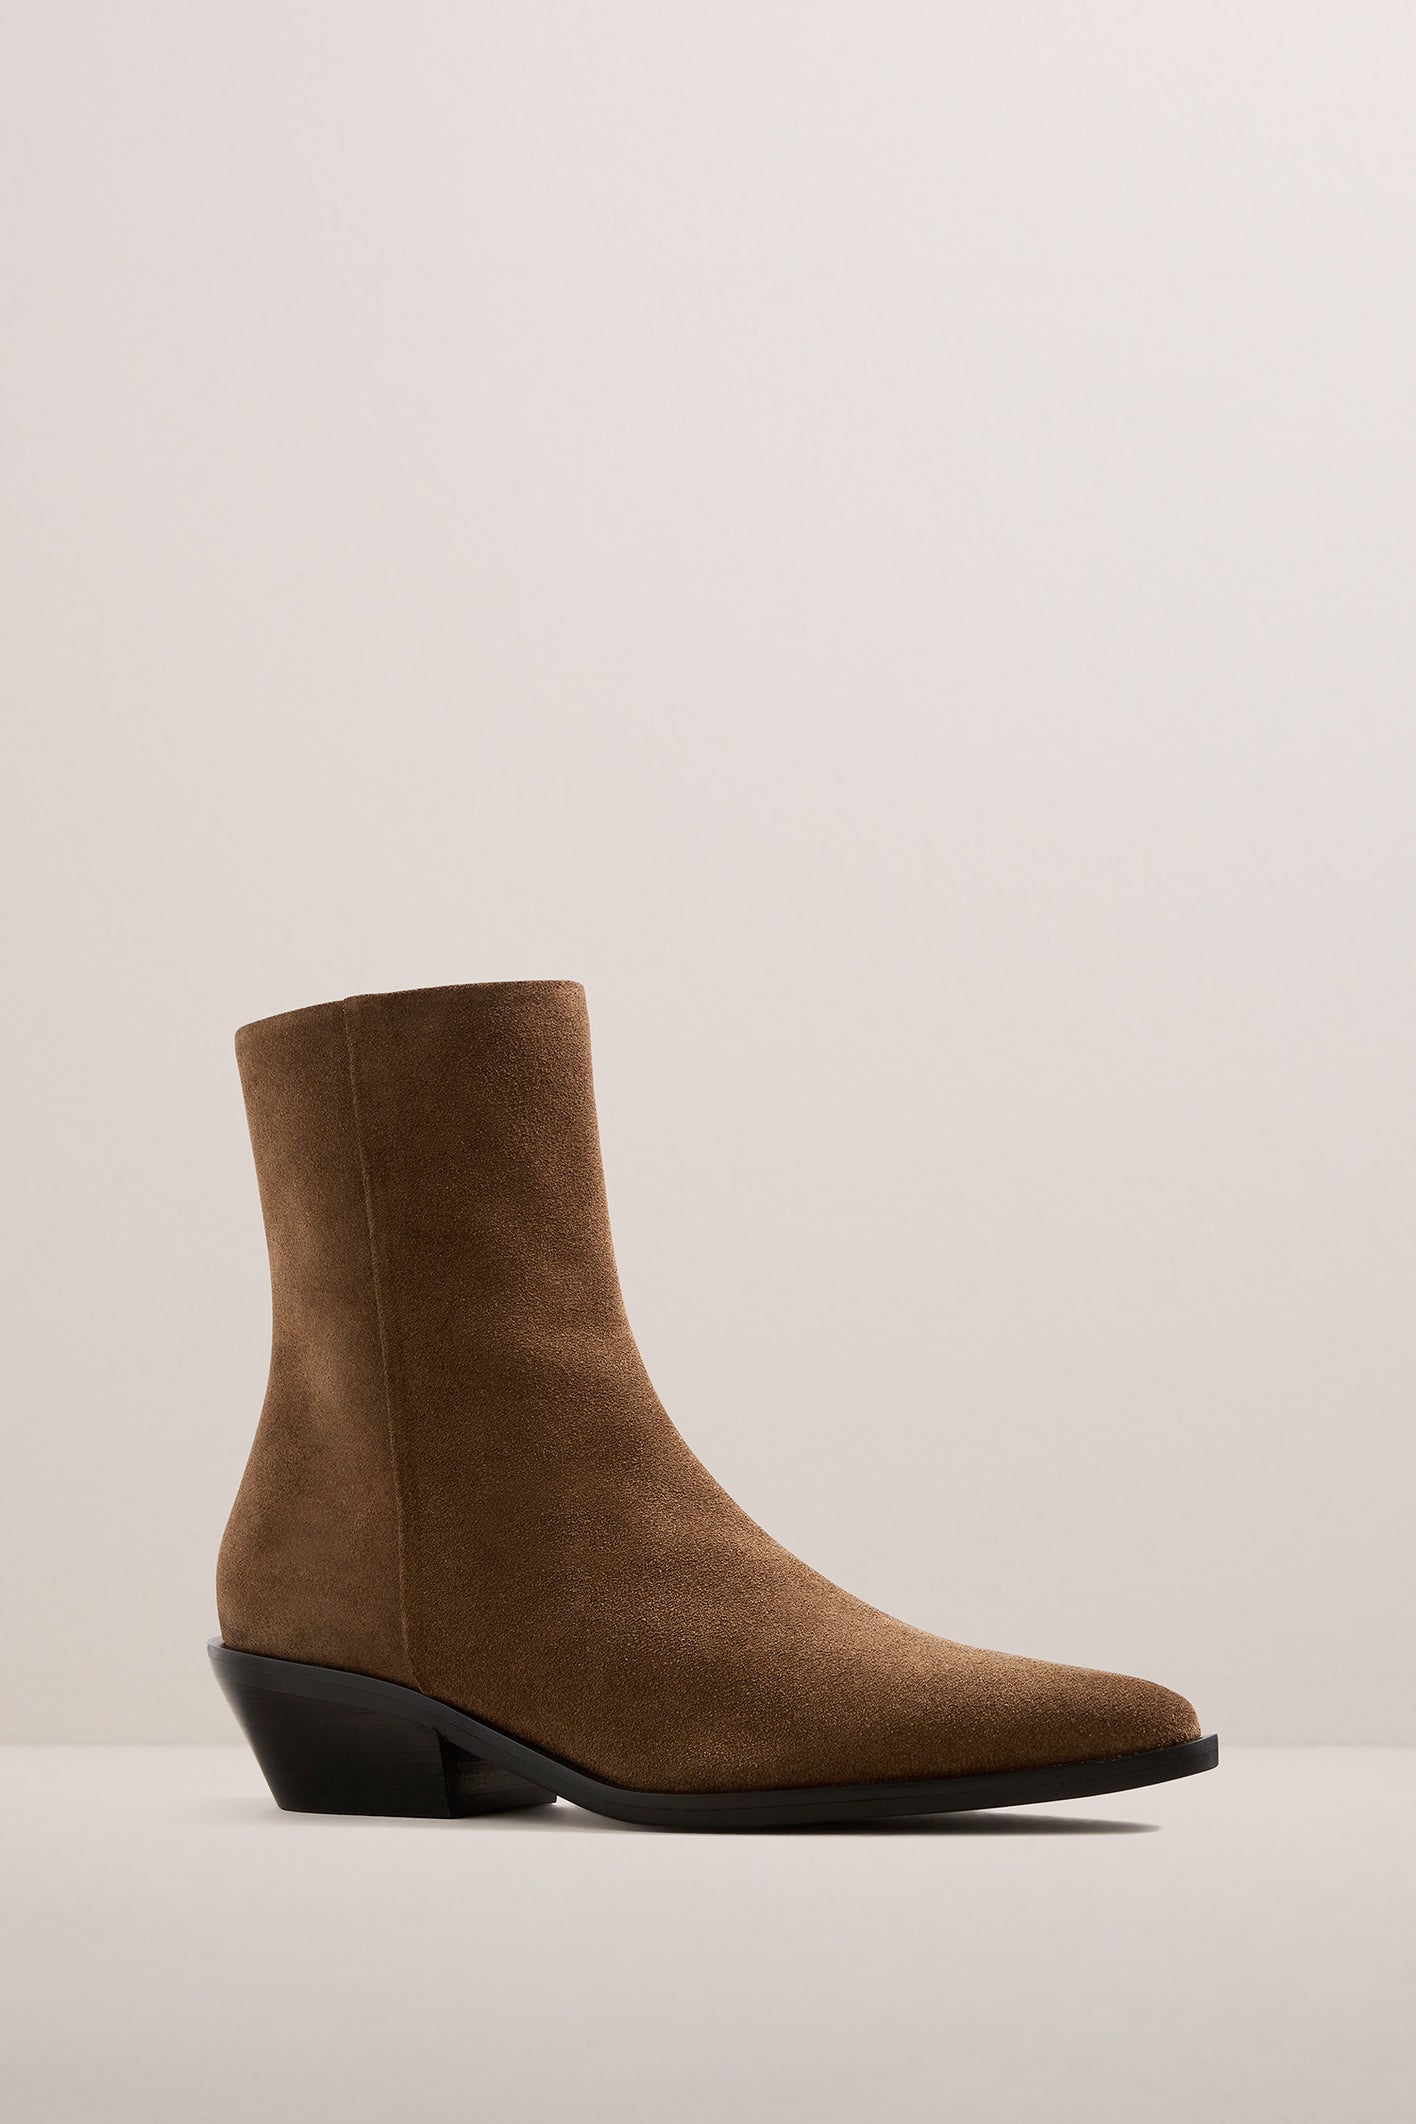 A.Emery | The Hudson Boot - Nutmeg Suede